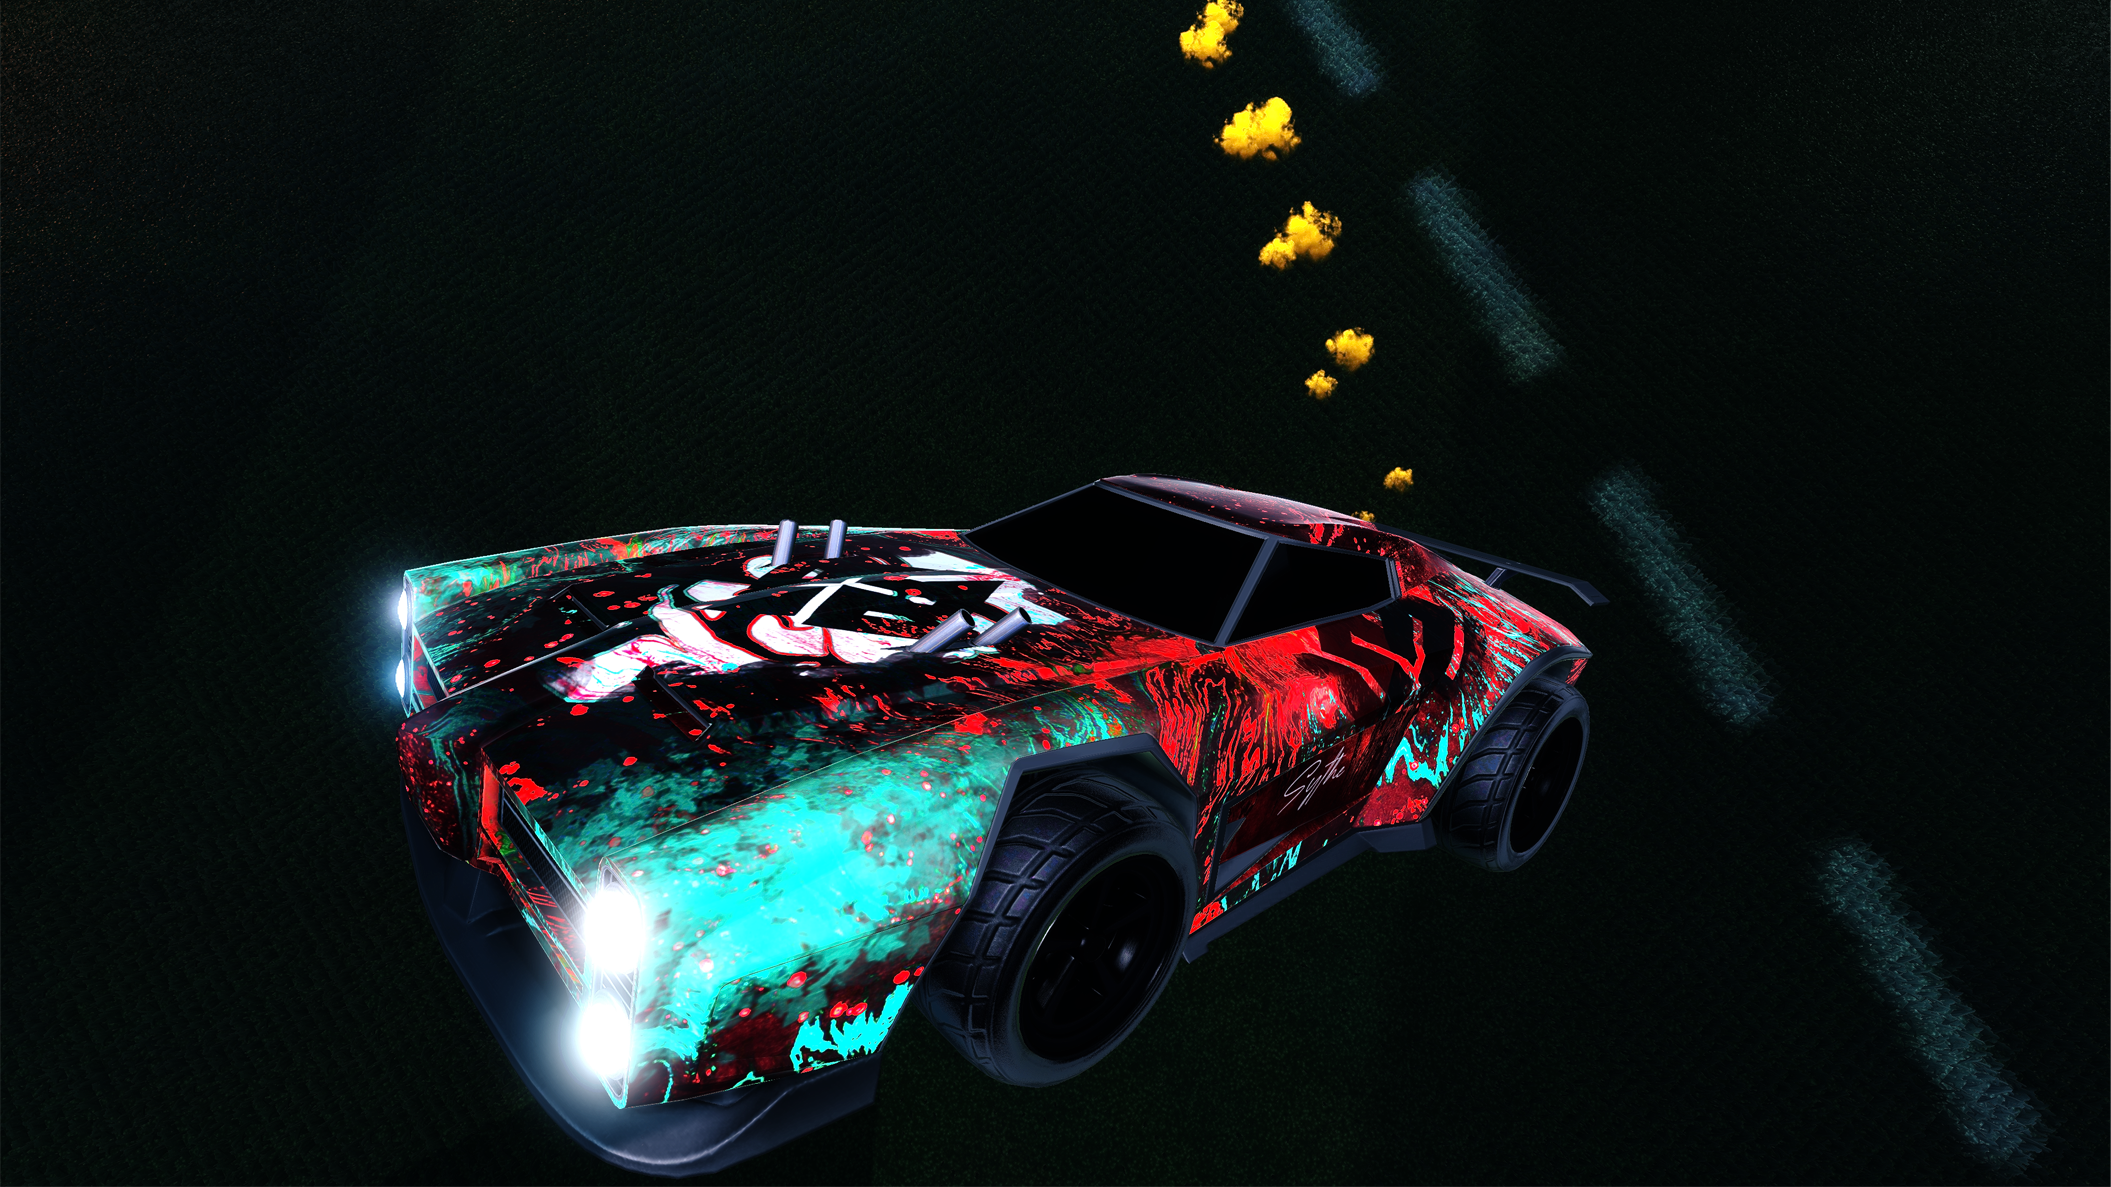 Dominus-Sythe Decal